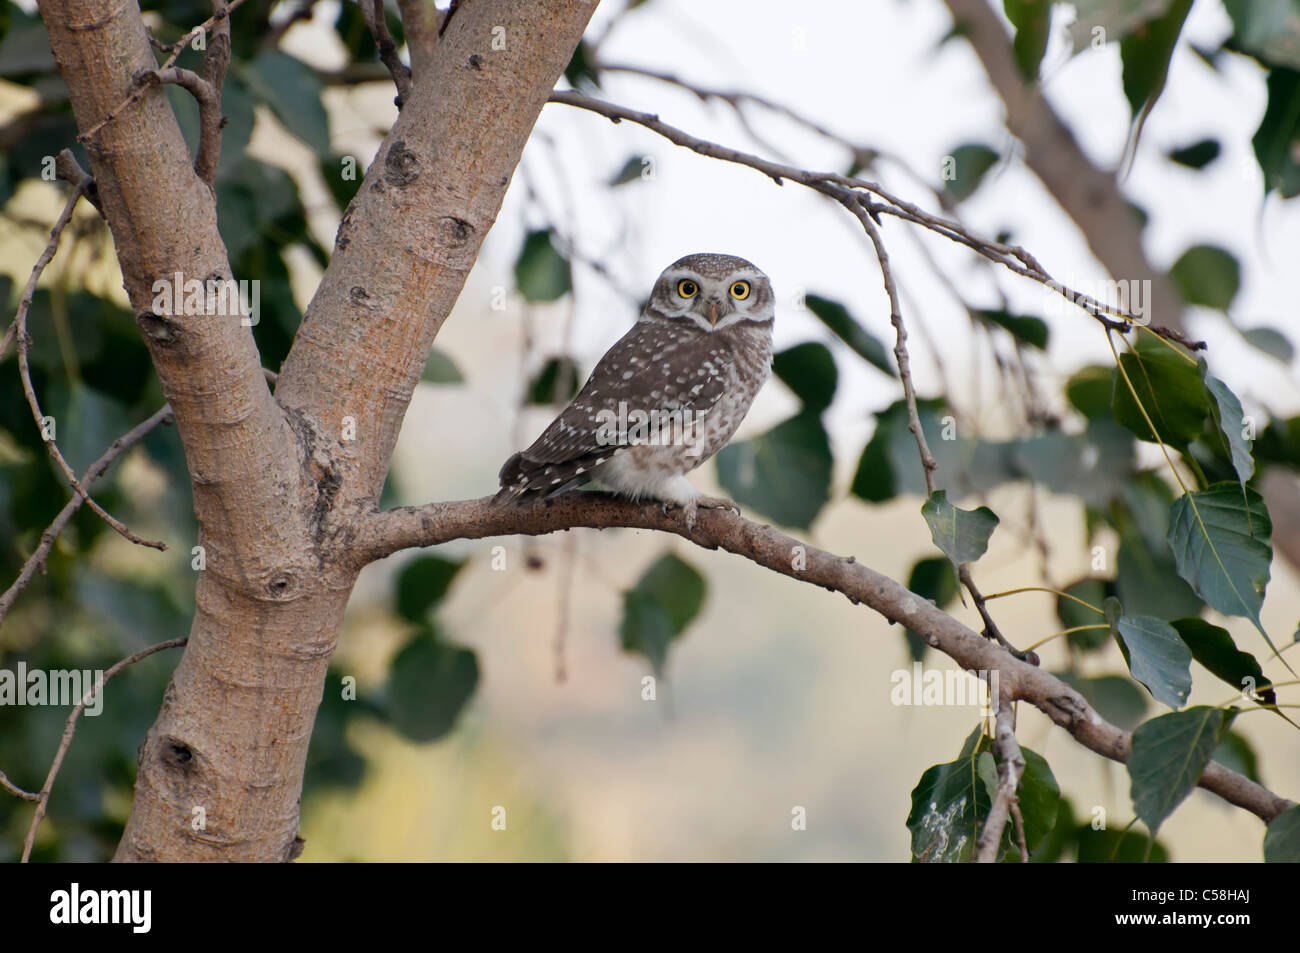 A local owl of Punjab, Pakistan resting on a tree branch with bright yellow eyes. Stock Photo